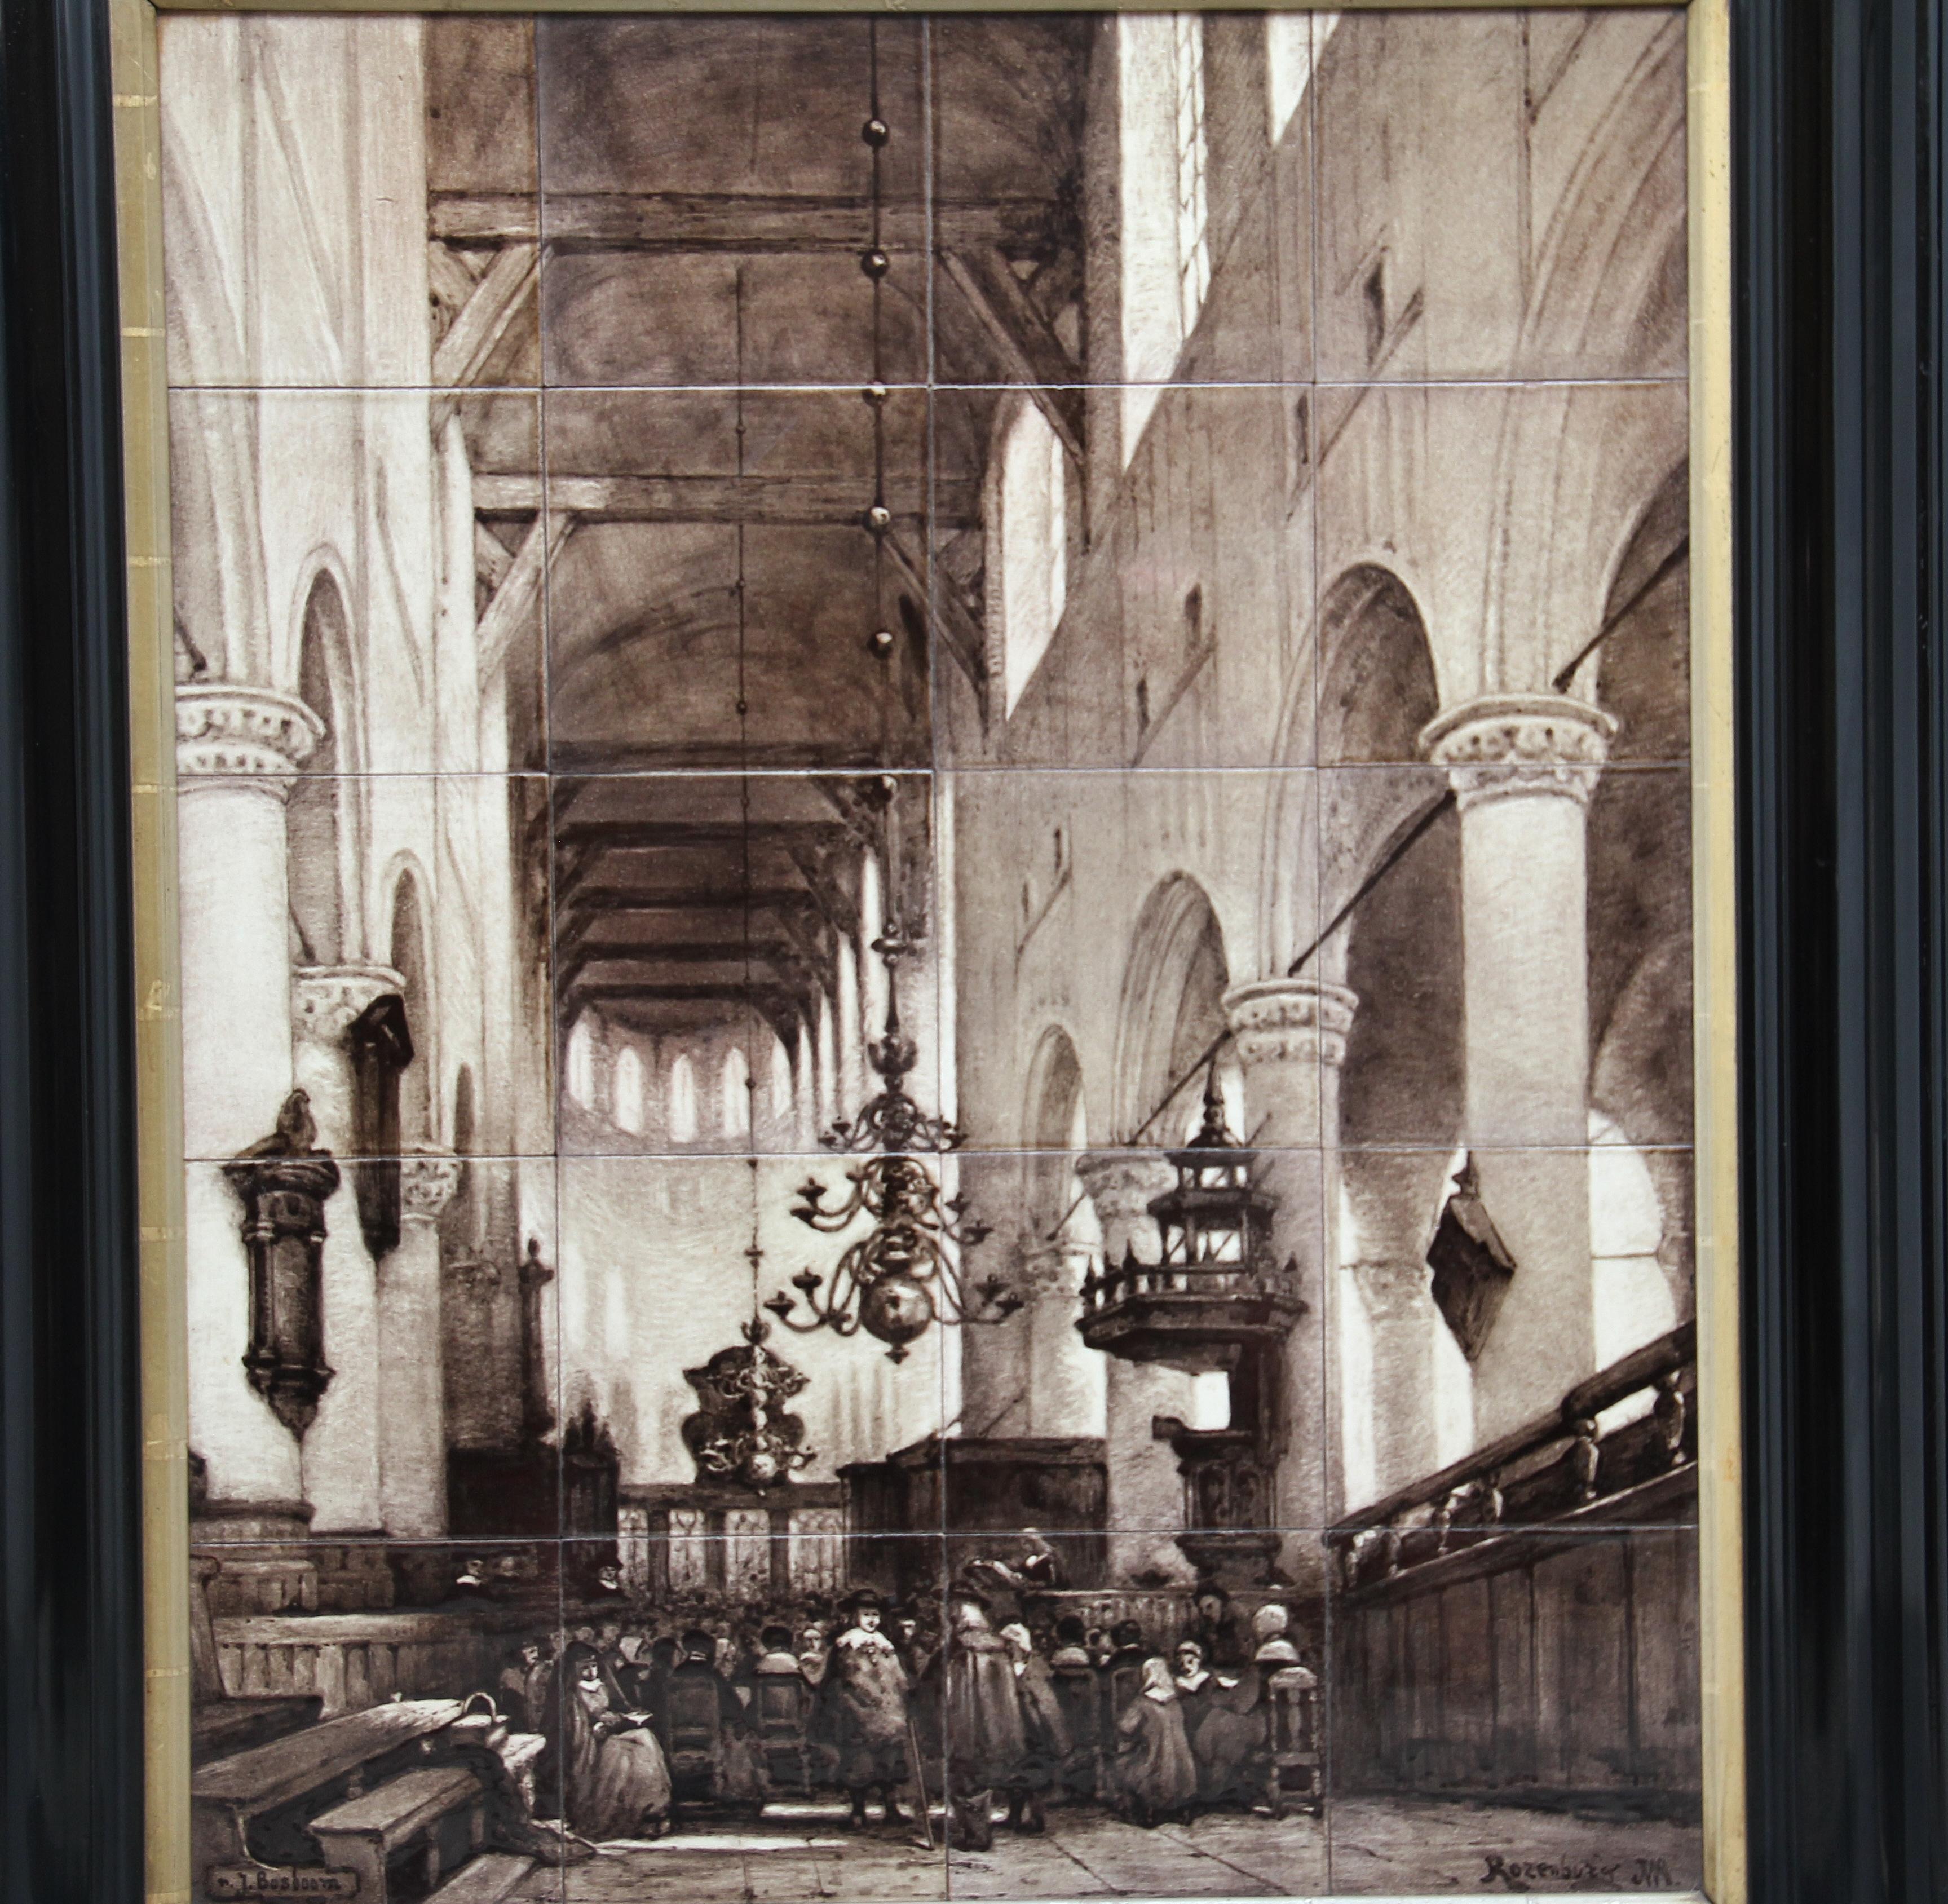 An unusual and rare Dutch interior scene of figures in a church made up of 20 separate glazed tiles in a nice ebonized frame, signed in the bottom right hand corner, circa 1890.
     